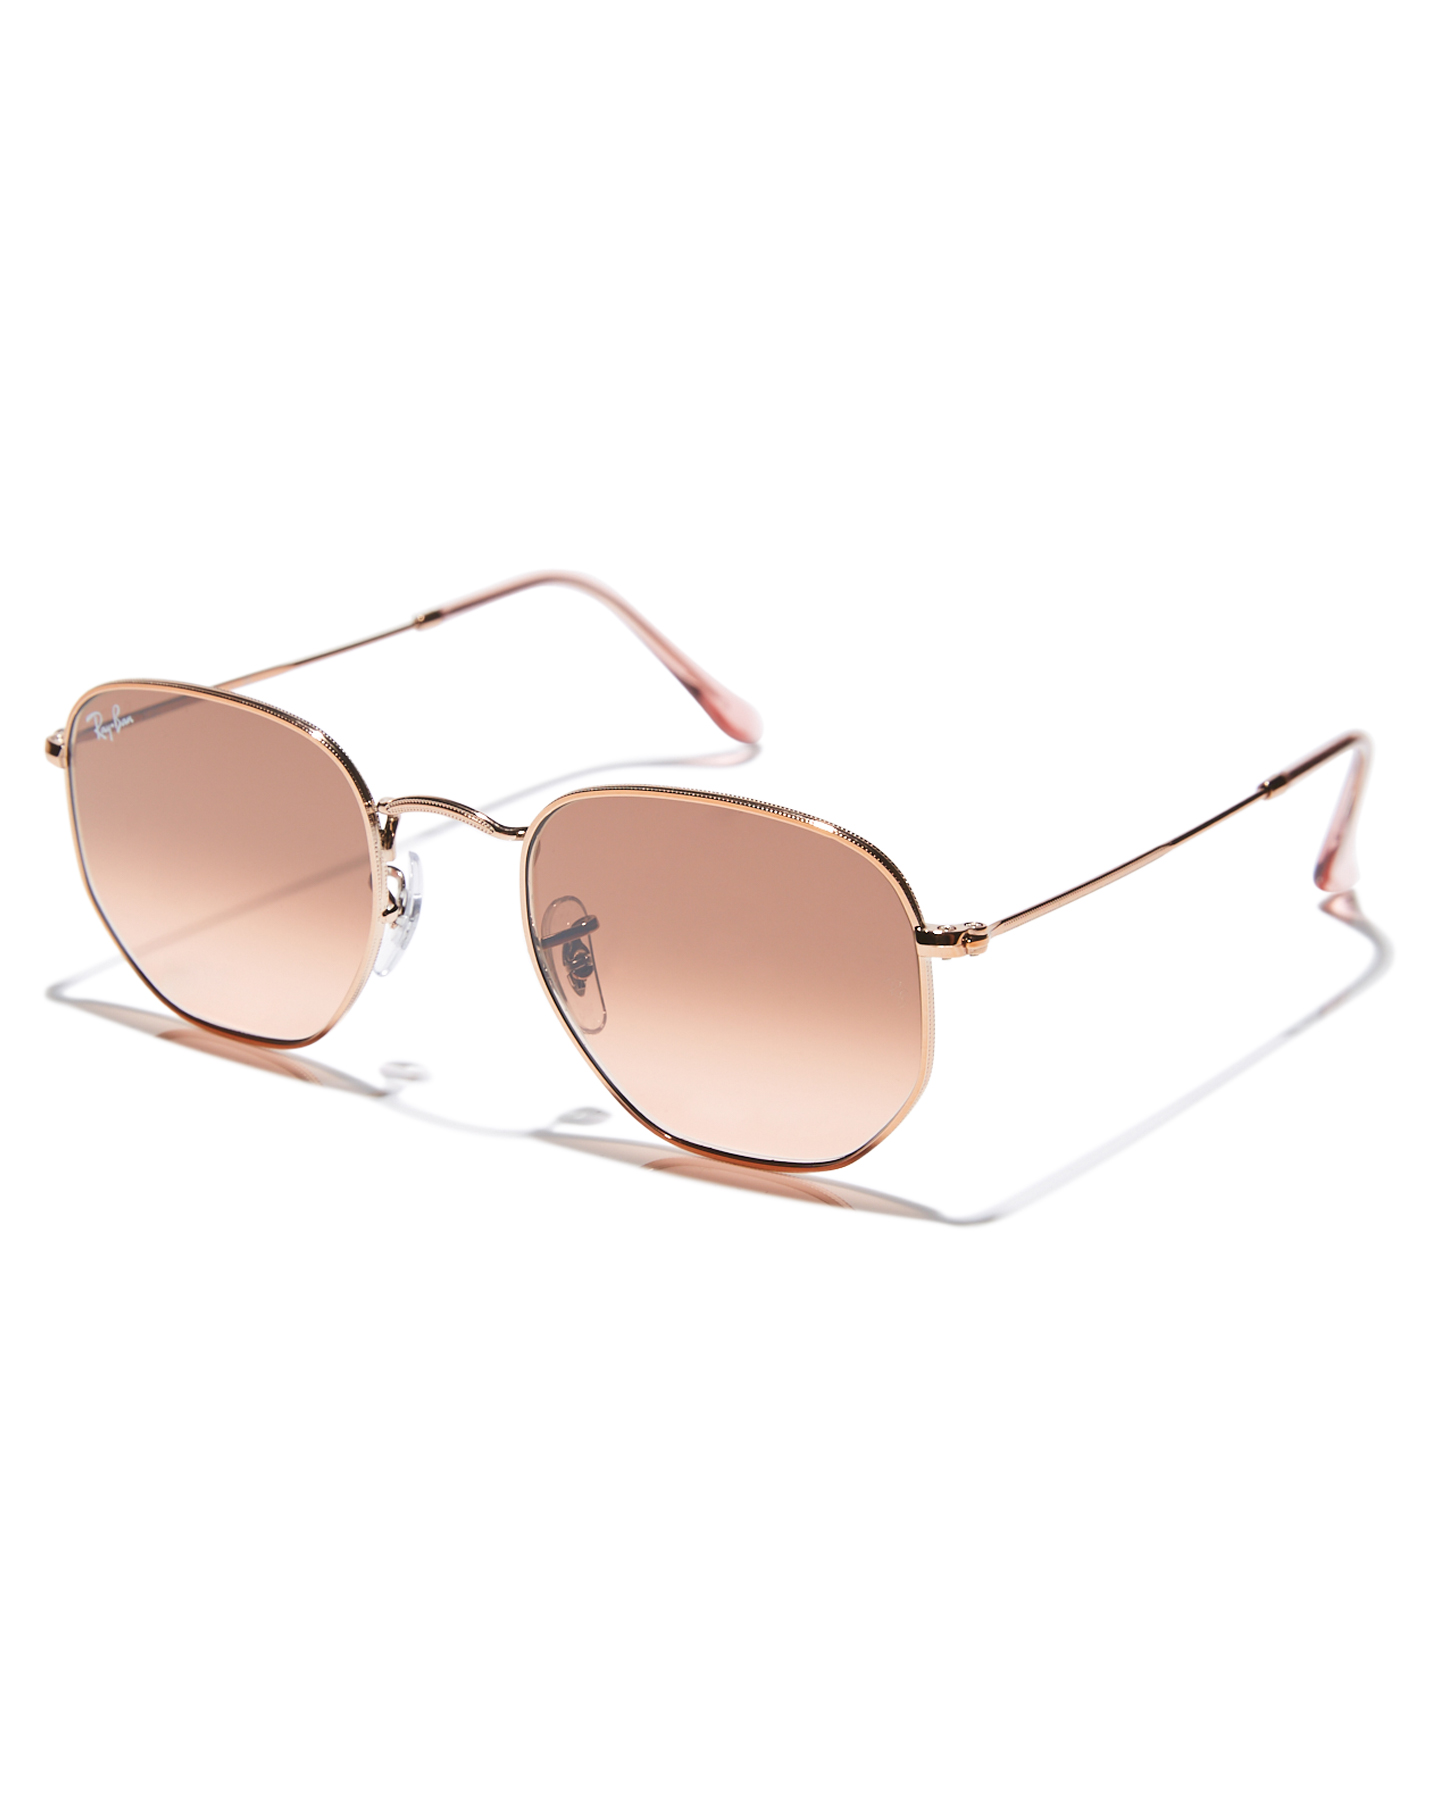 ray ban sunglasses sale online